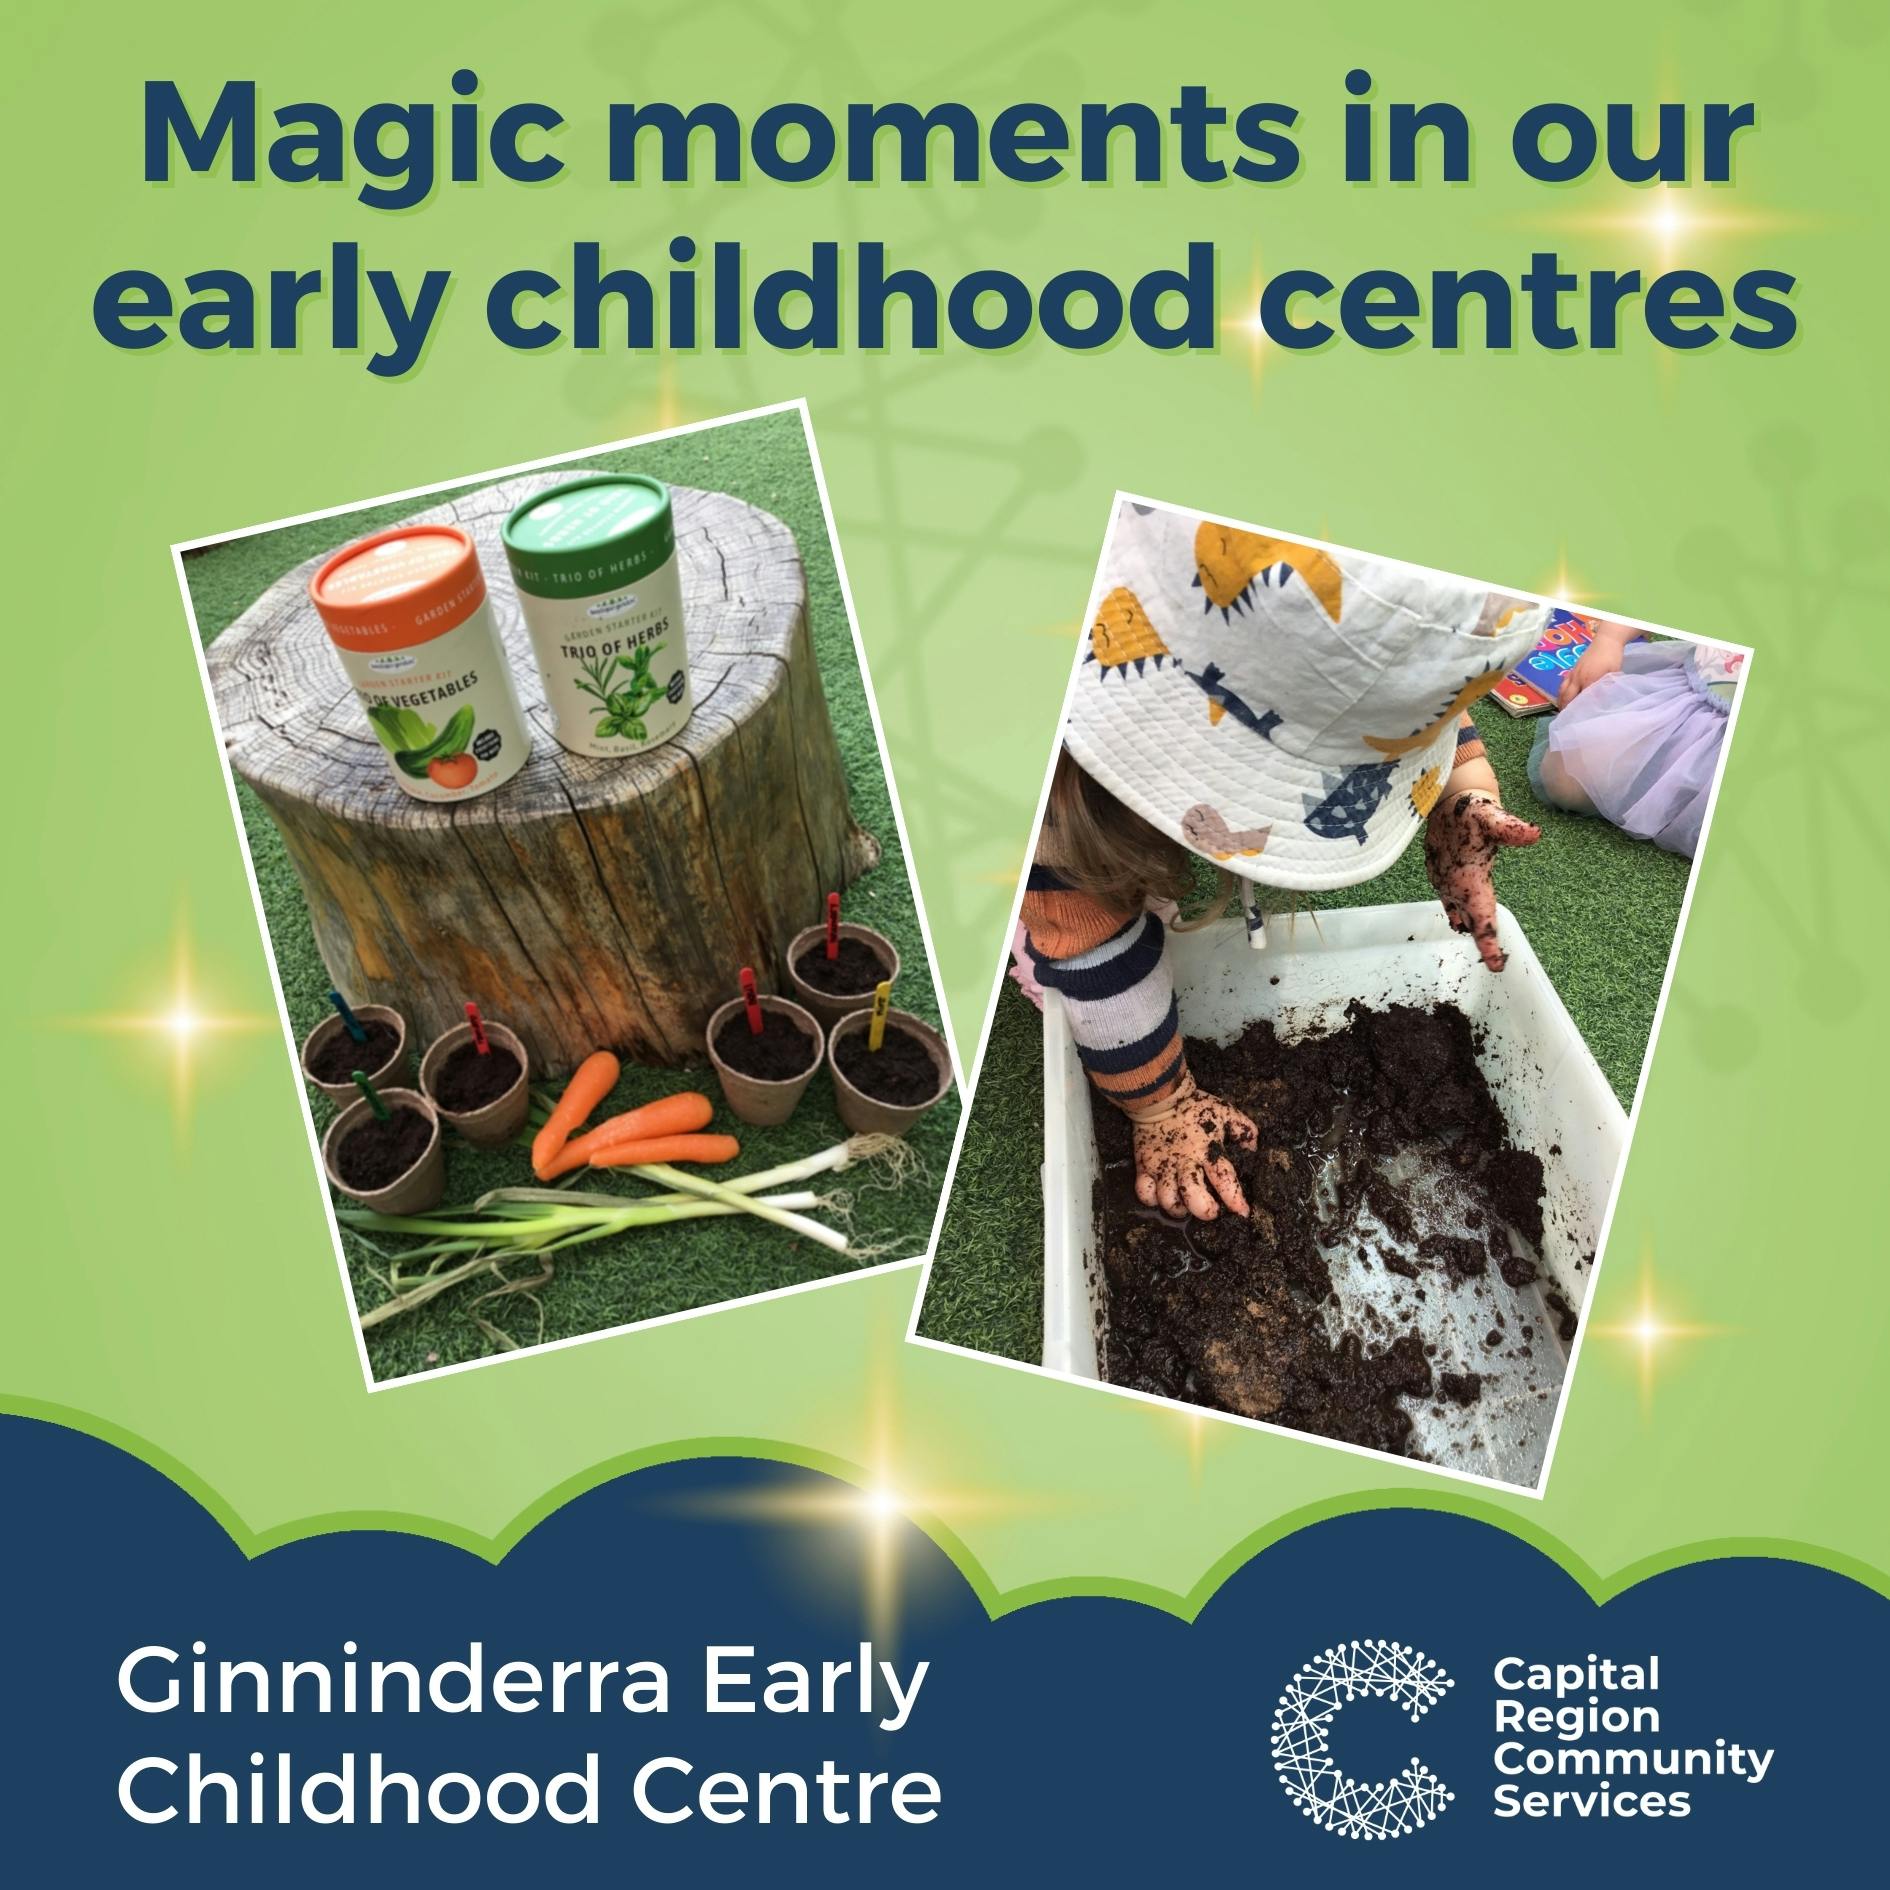 Magic moment: Ginninderra Early Childhood Centre